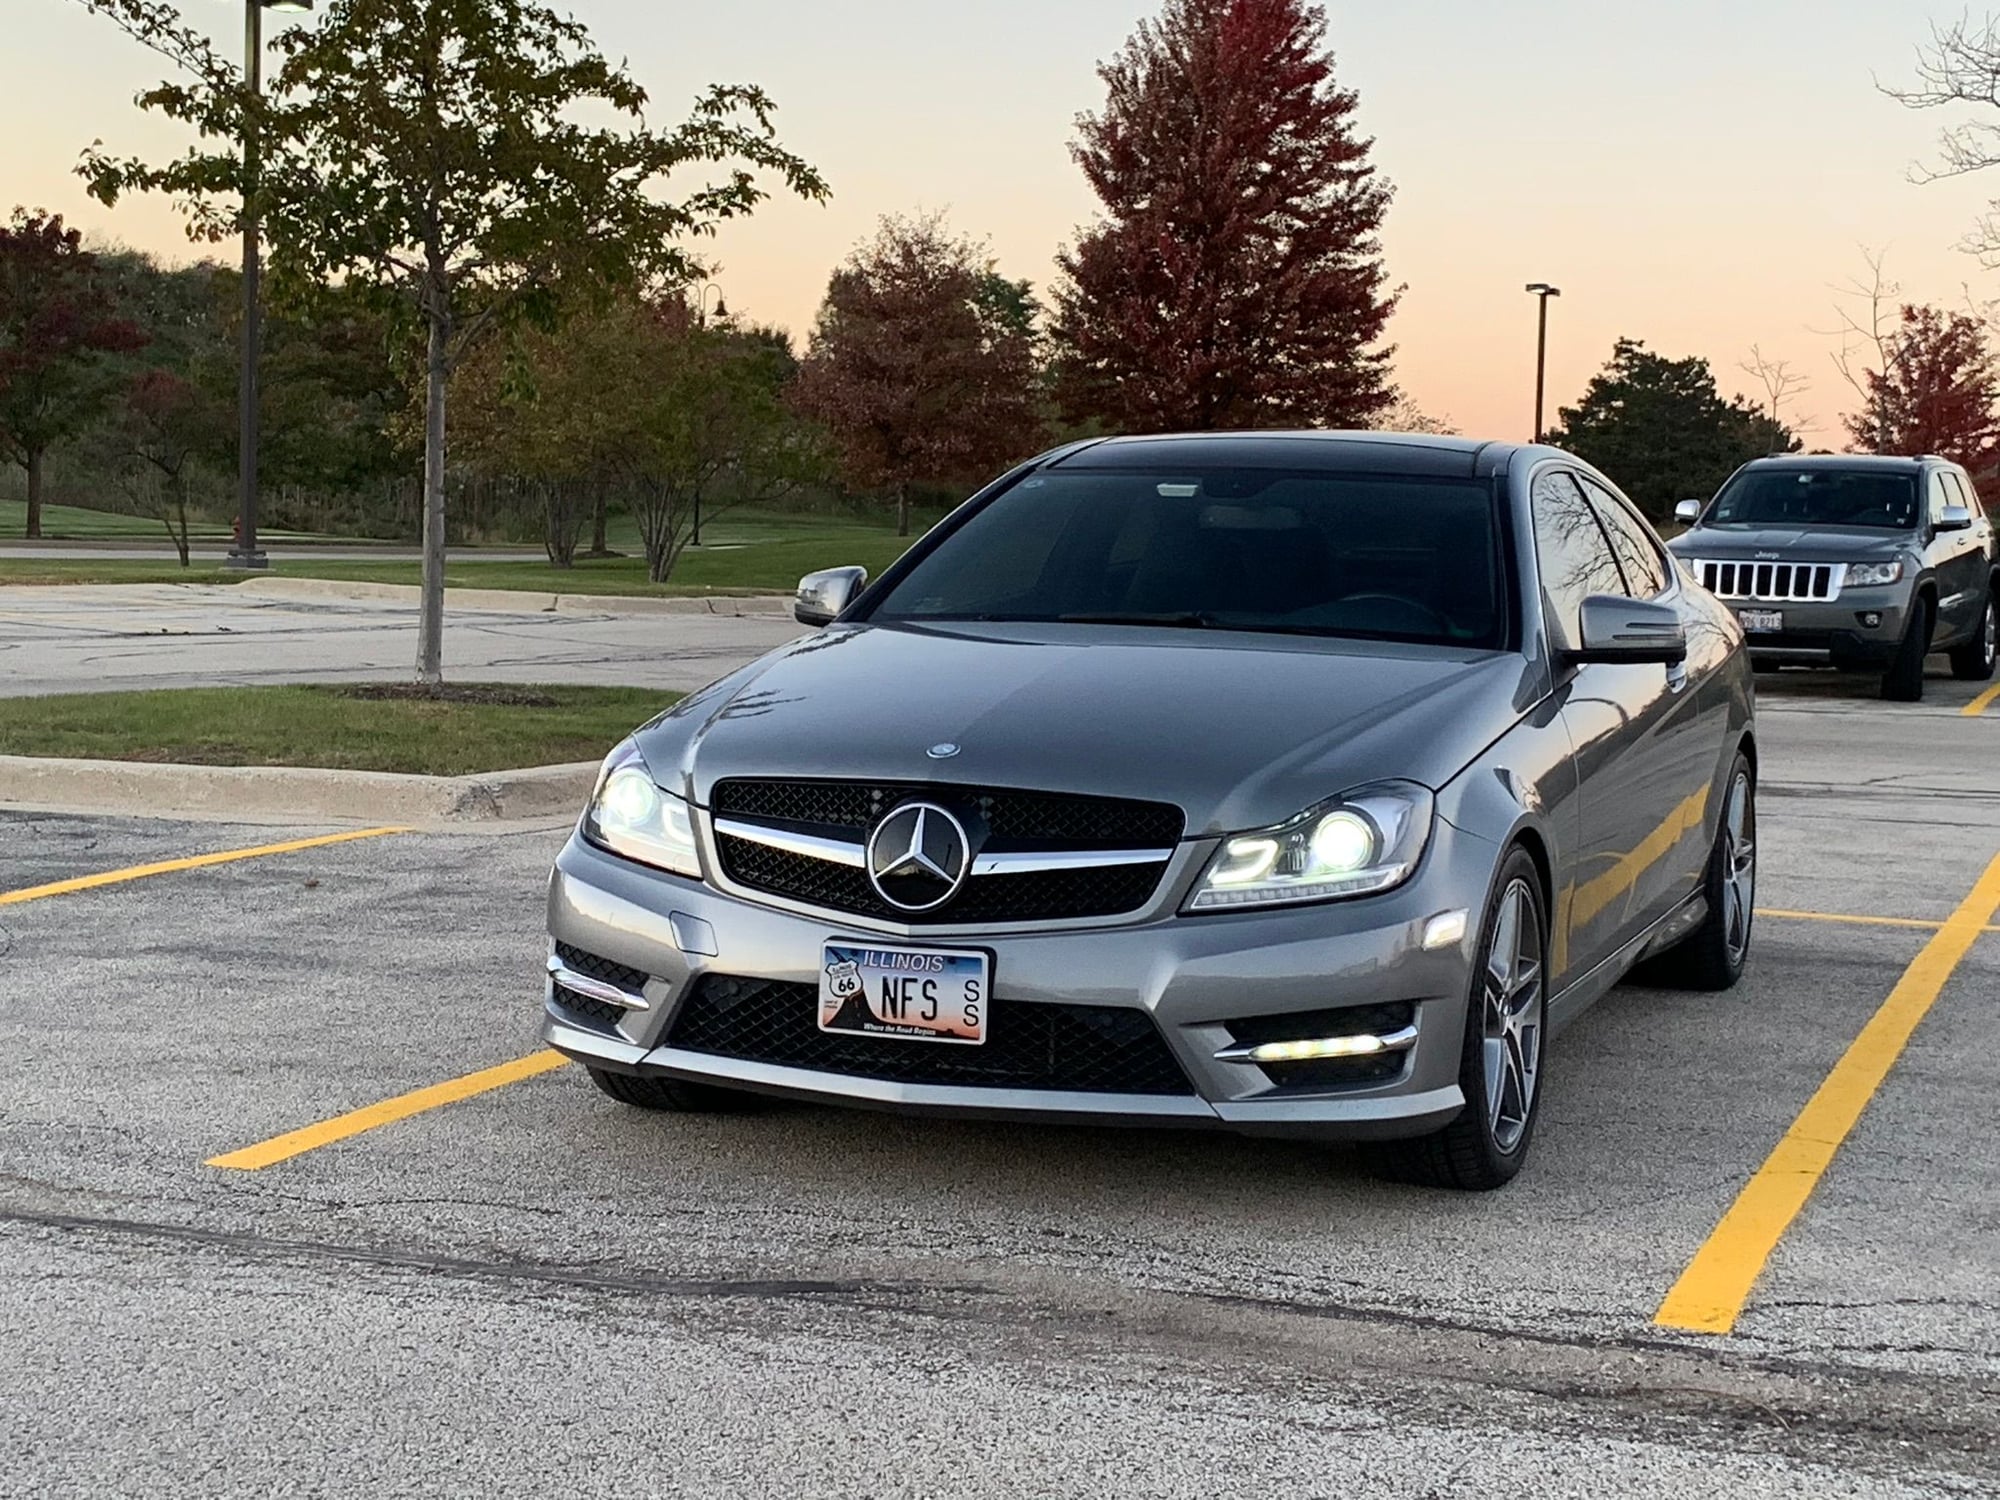 2012 Mercedes-Benz C350 - Low mileage 2012 c350 (blue efficiency) 4matic - Used - VIN WDDGJ8JB1CF907633 - 68,000 Miles - 6 cyl - AWD - Automatic - Coupe - Silver - Lindenhurst, IL 60046, United States